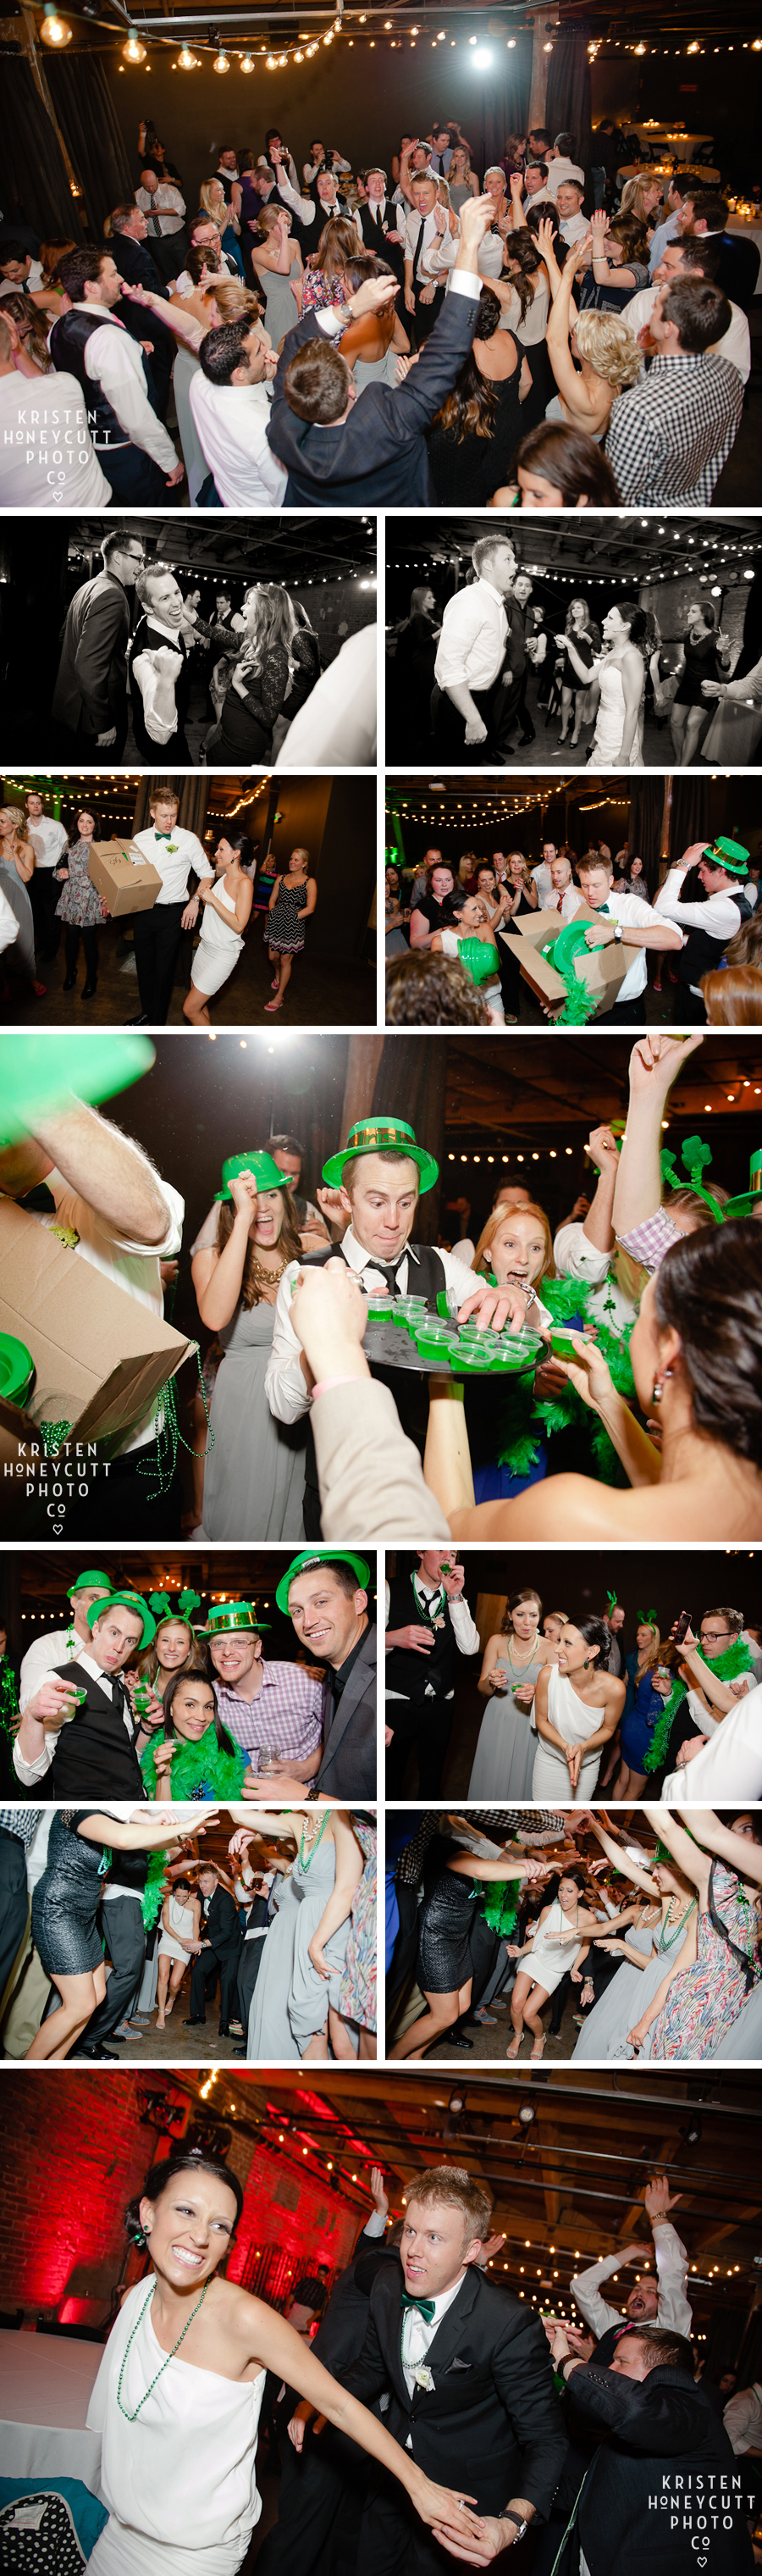 St. Patricks day party at wedding reception in Seattle